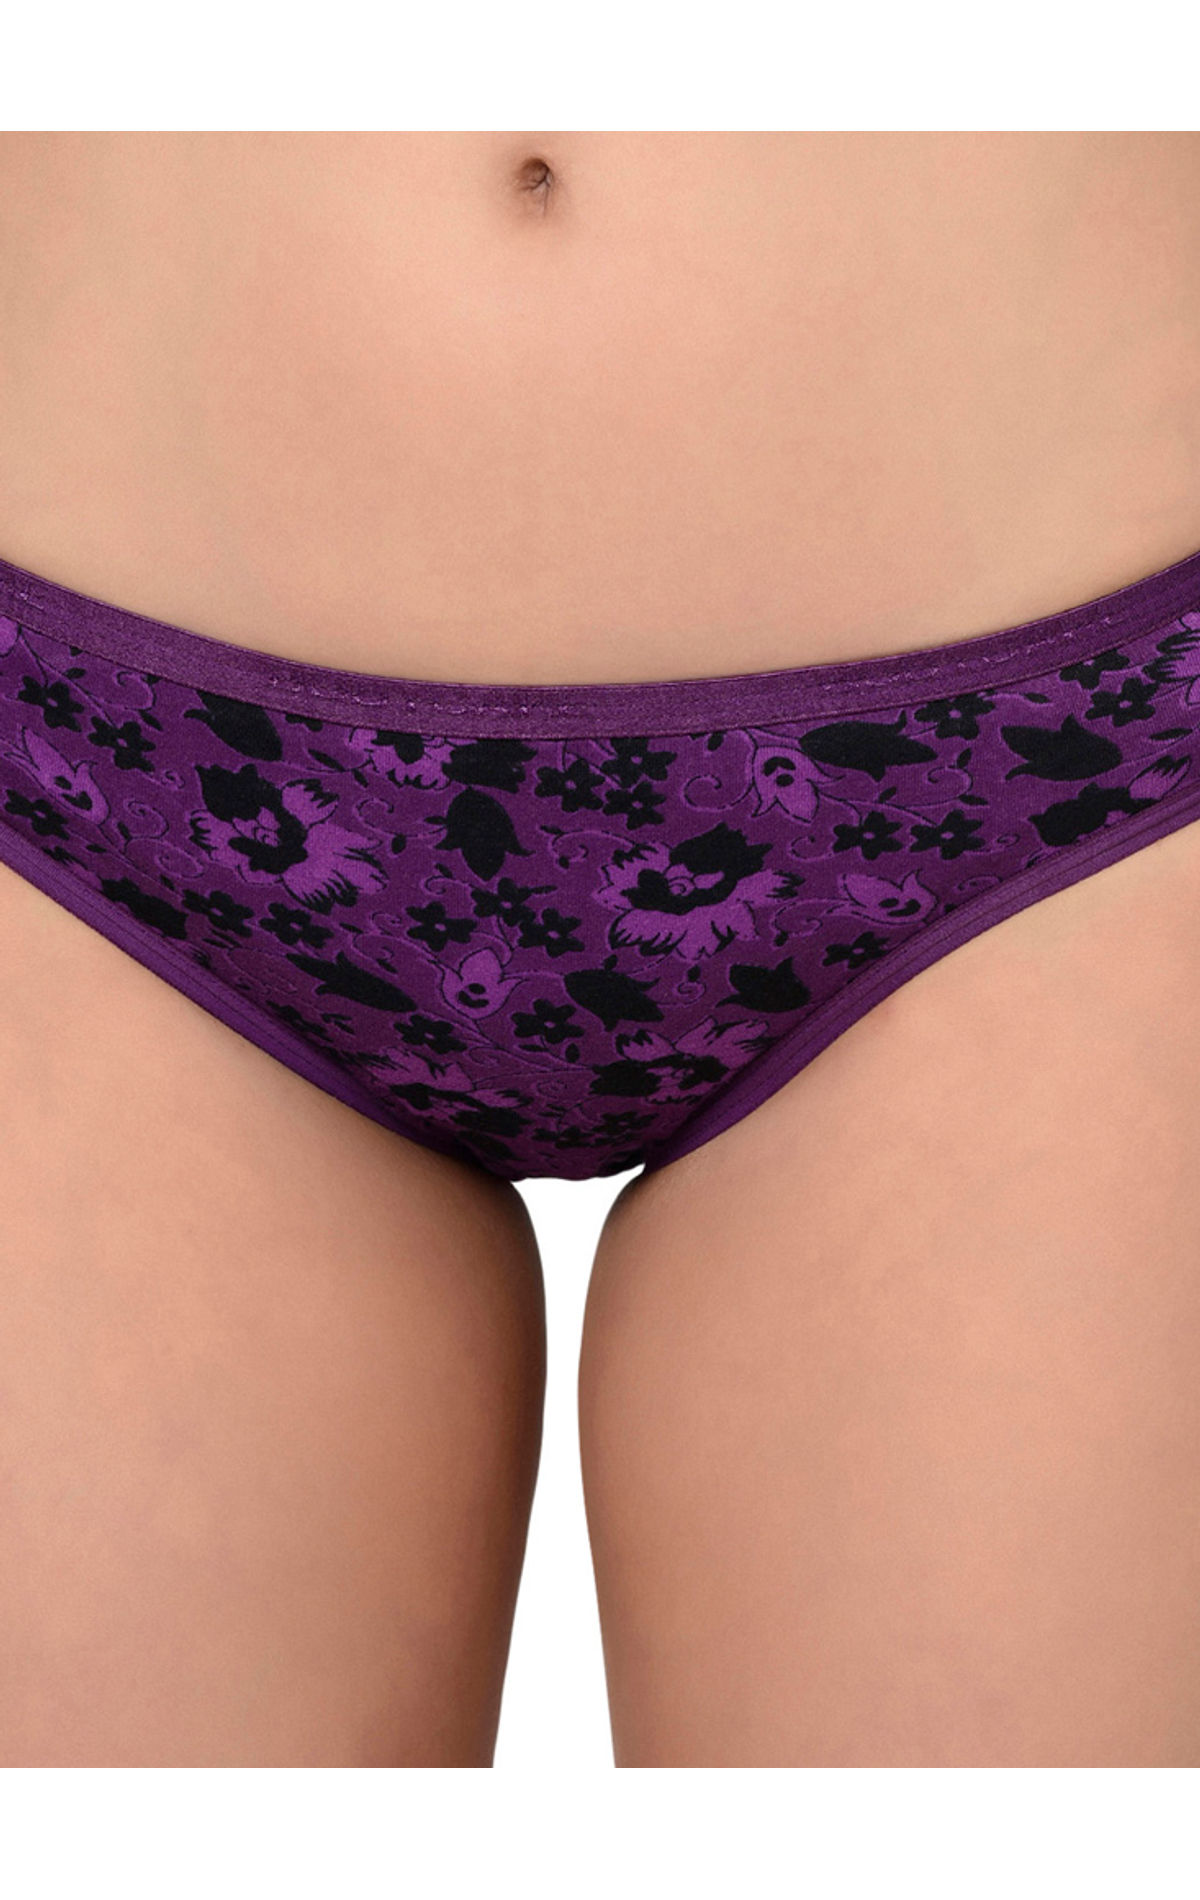 Bodycare Pack Of 3 Printed Panty In Assorted Colors-8568b-3pcs, 8568b-3pcs